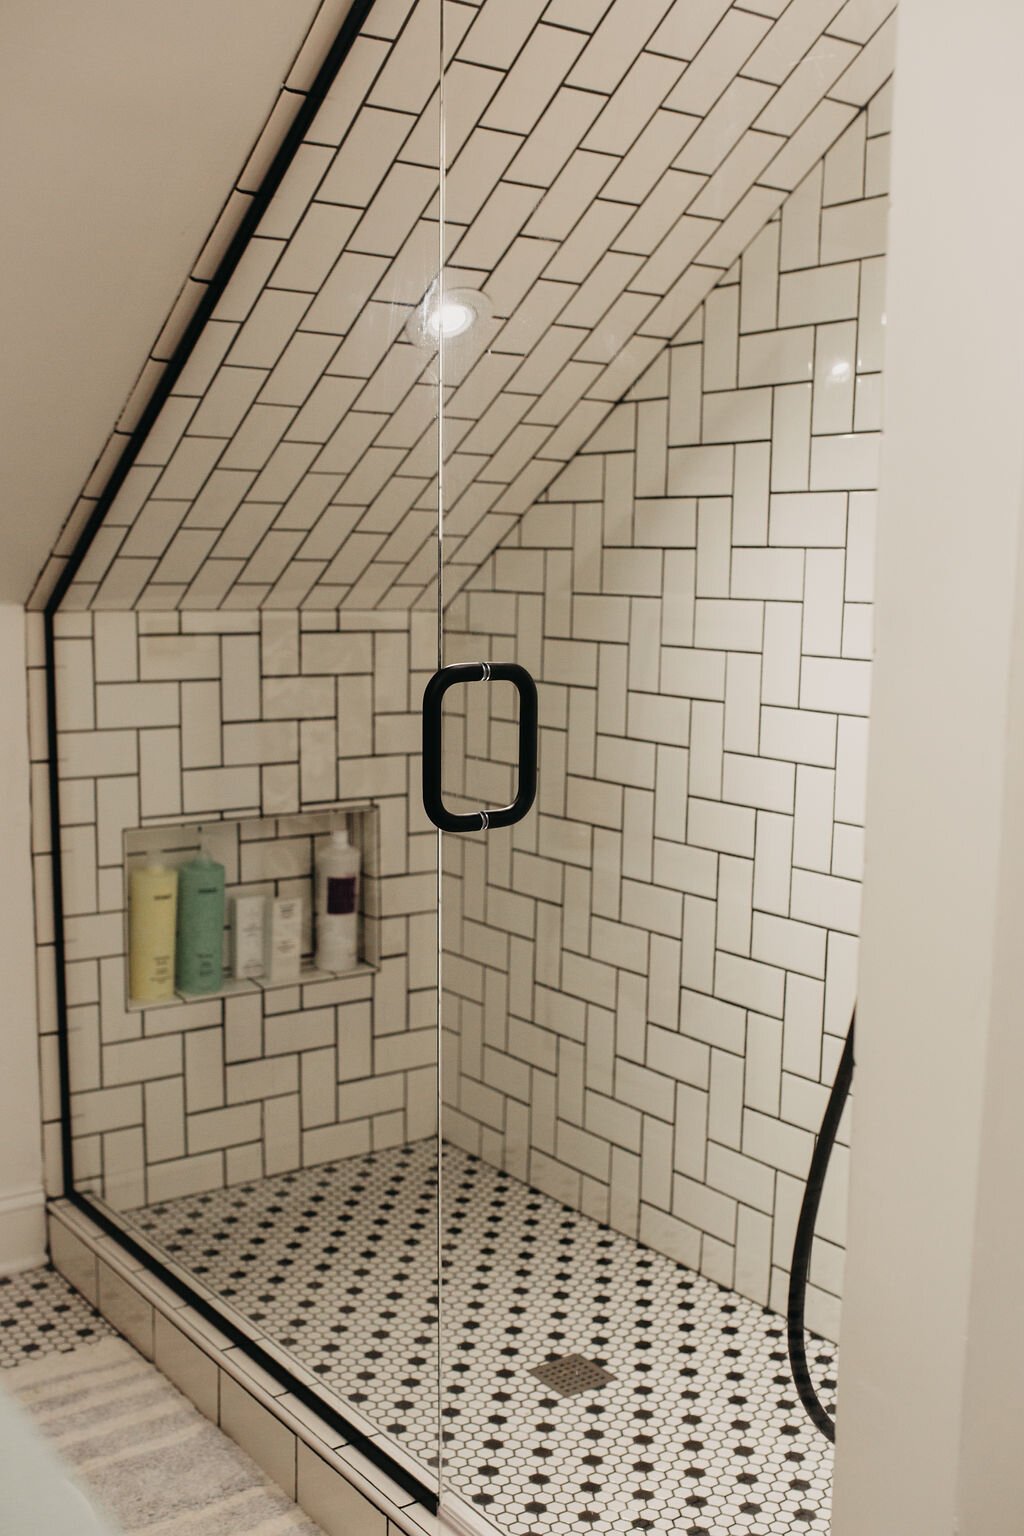 Renovating Grubby Ceramic Tile and Grout in a Beckenham Bathroom